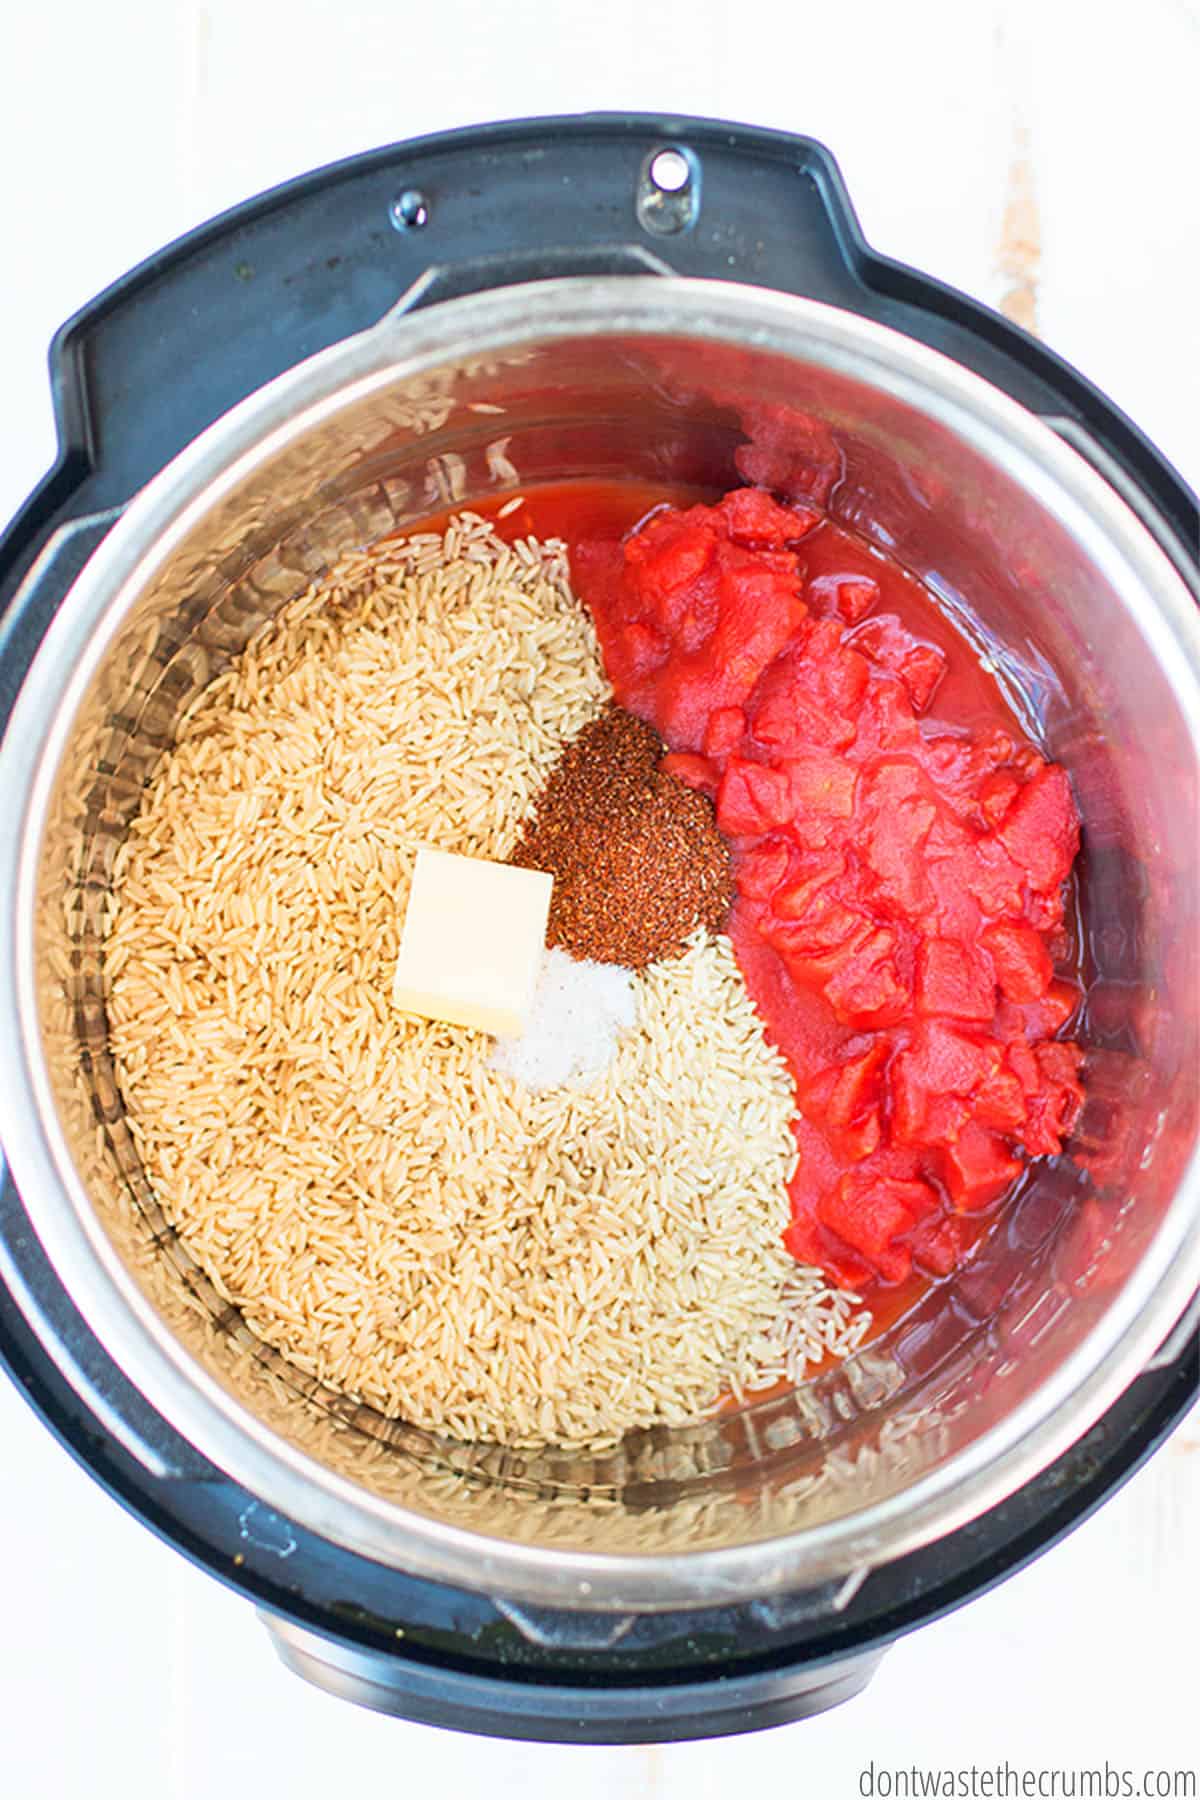 An Instant Pot is filled with uncooked rice, spices, diced tomatoes, and a chunk of butter.